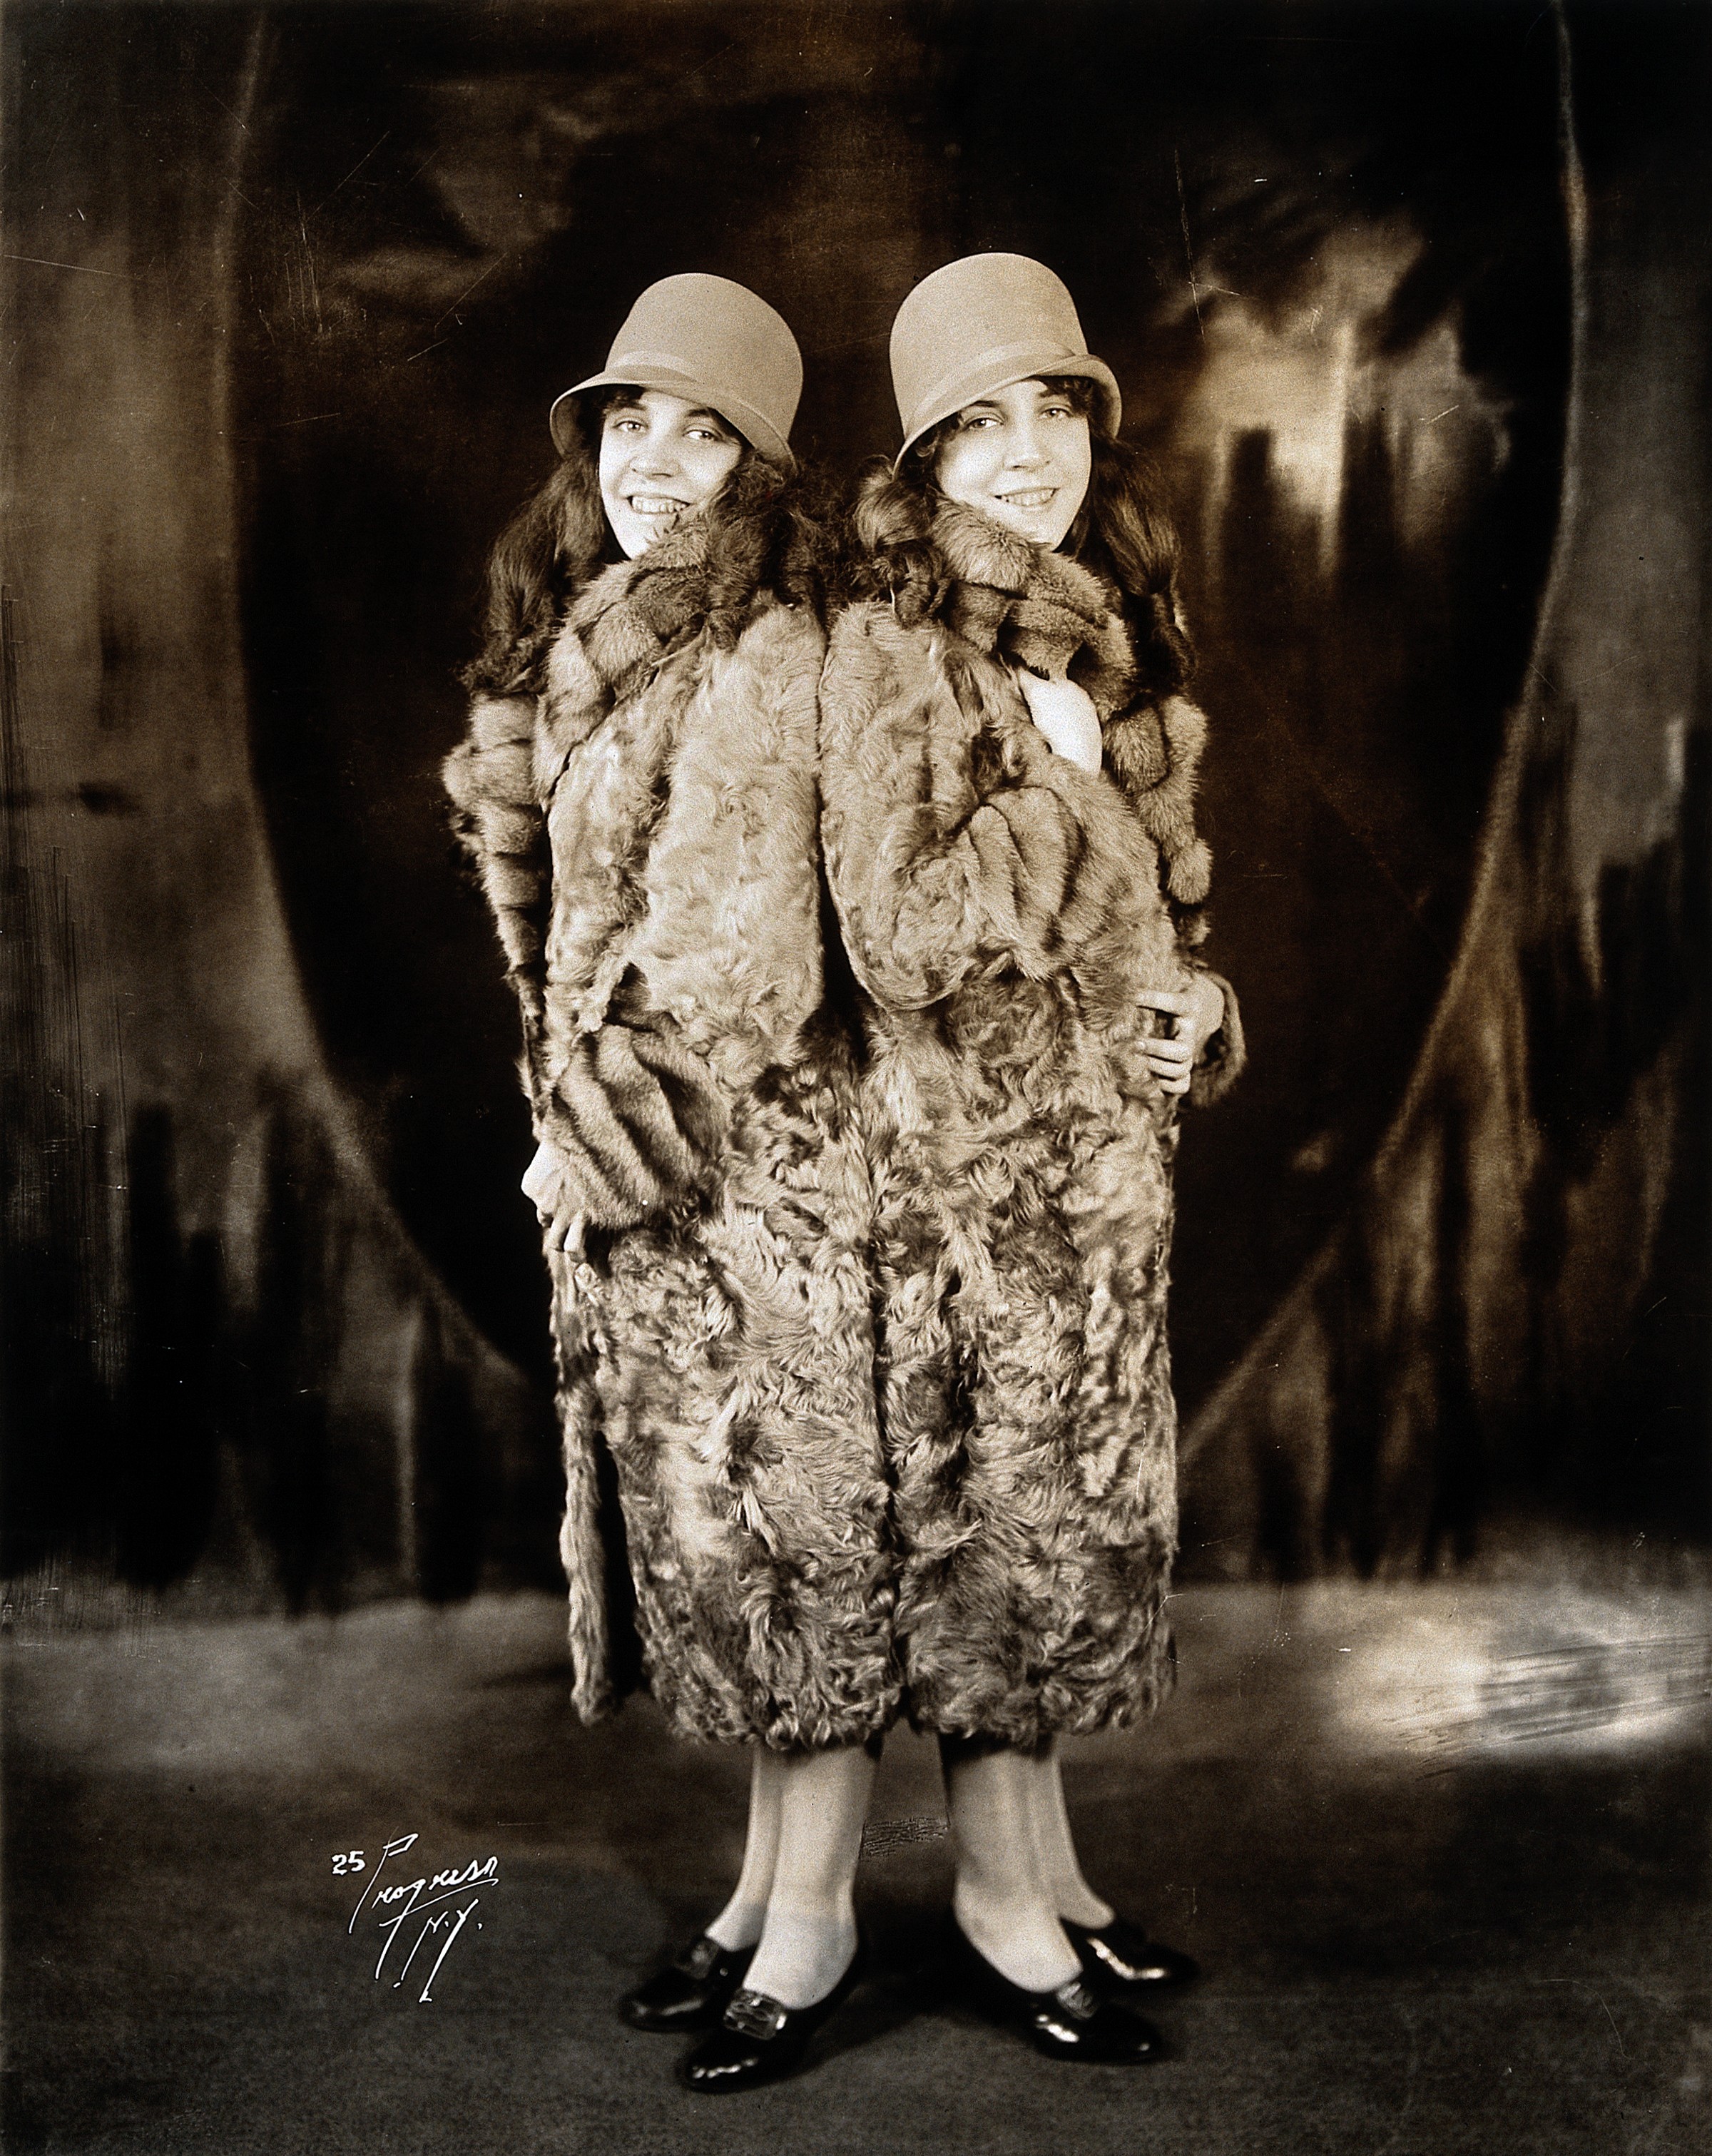 Daisy and Violet Hilton, conjoined twins, wearing fur coats. Wellcome V0029589